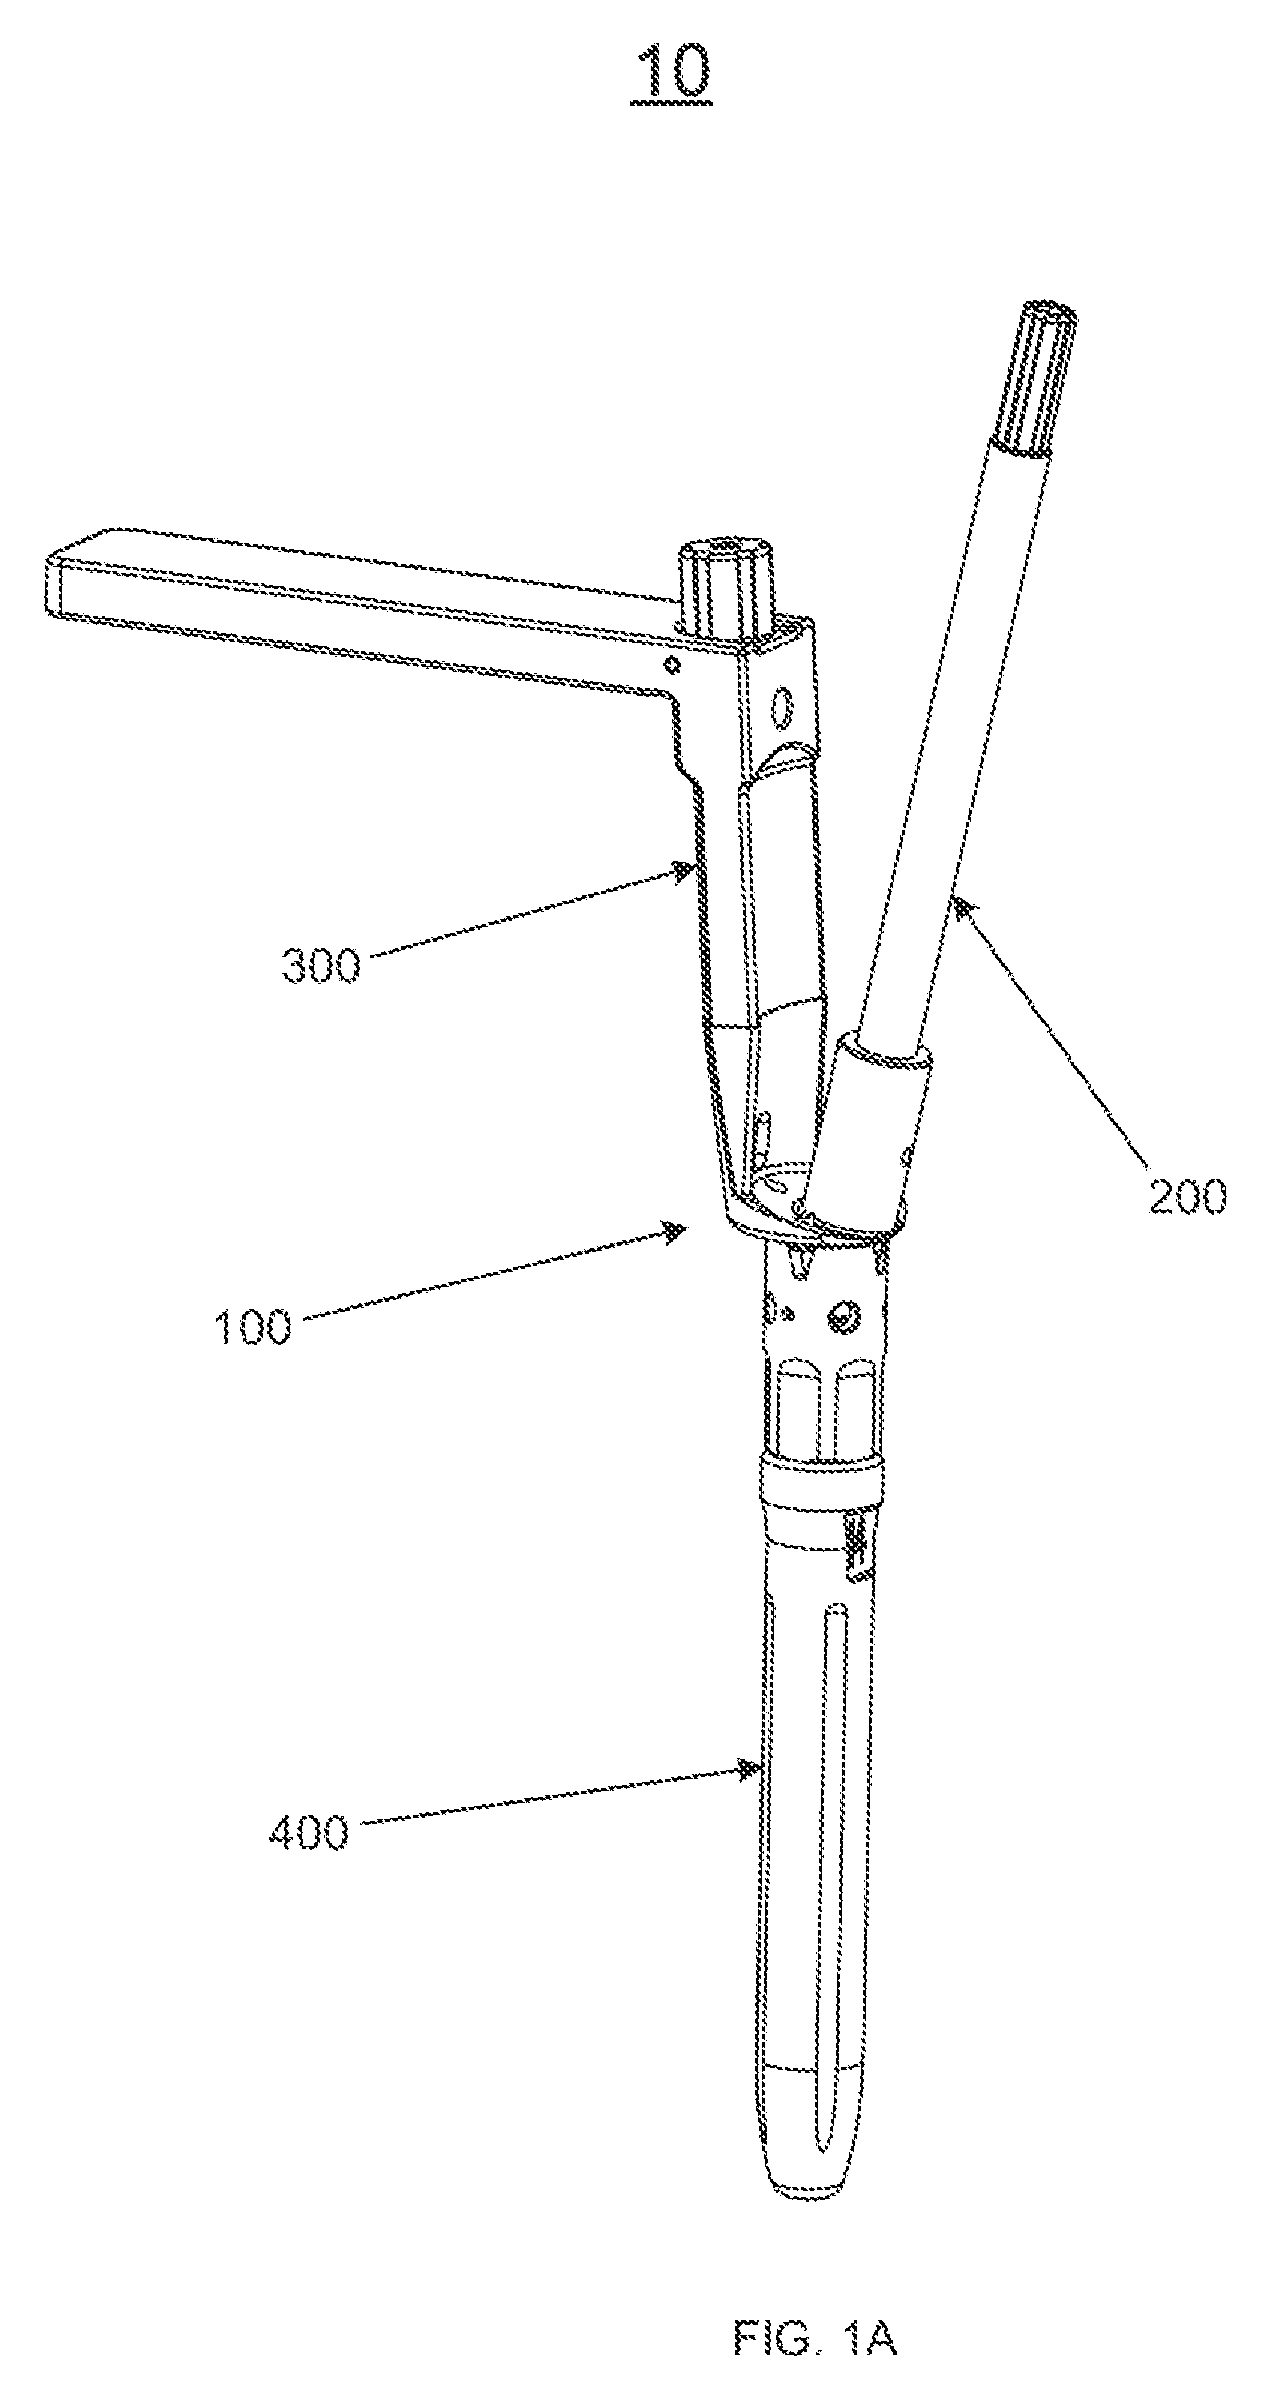 Surgical reaming instrument for shaping a bone cavity